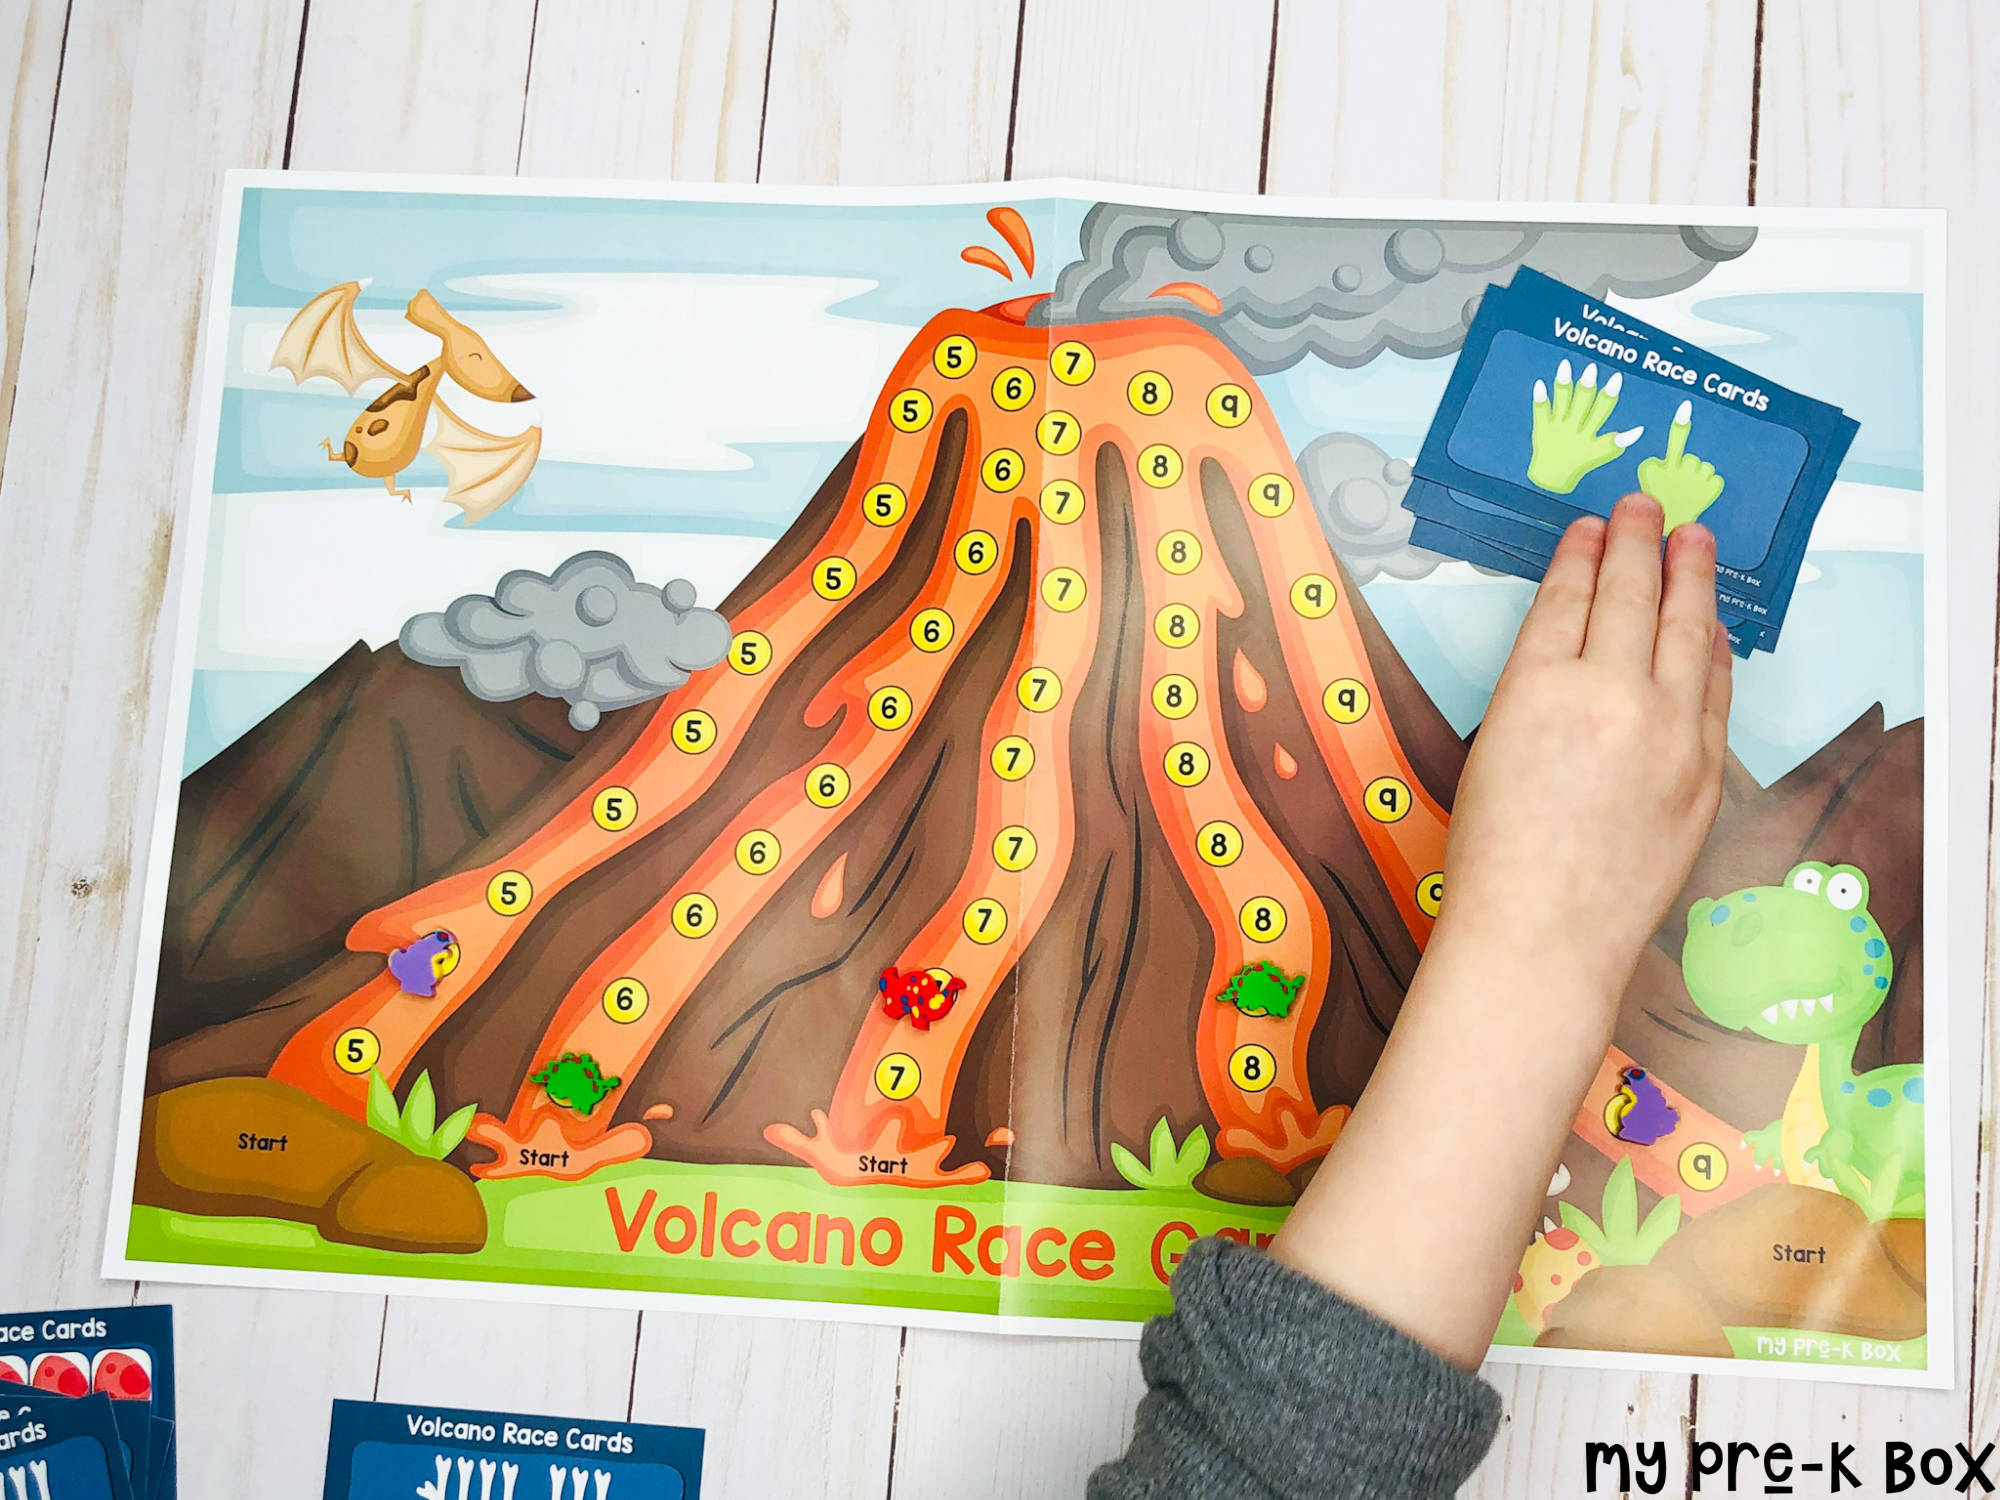 The Volcano Race Game